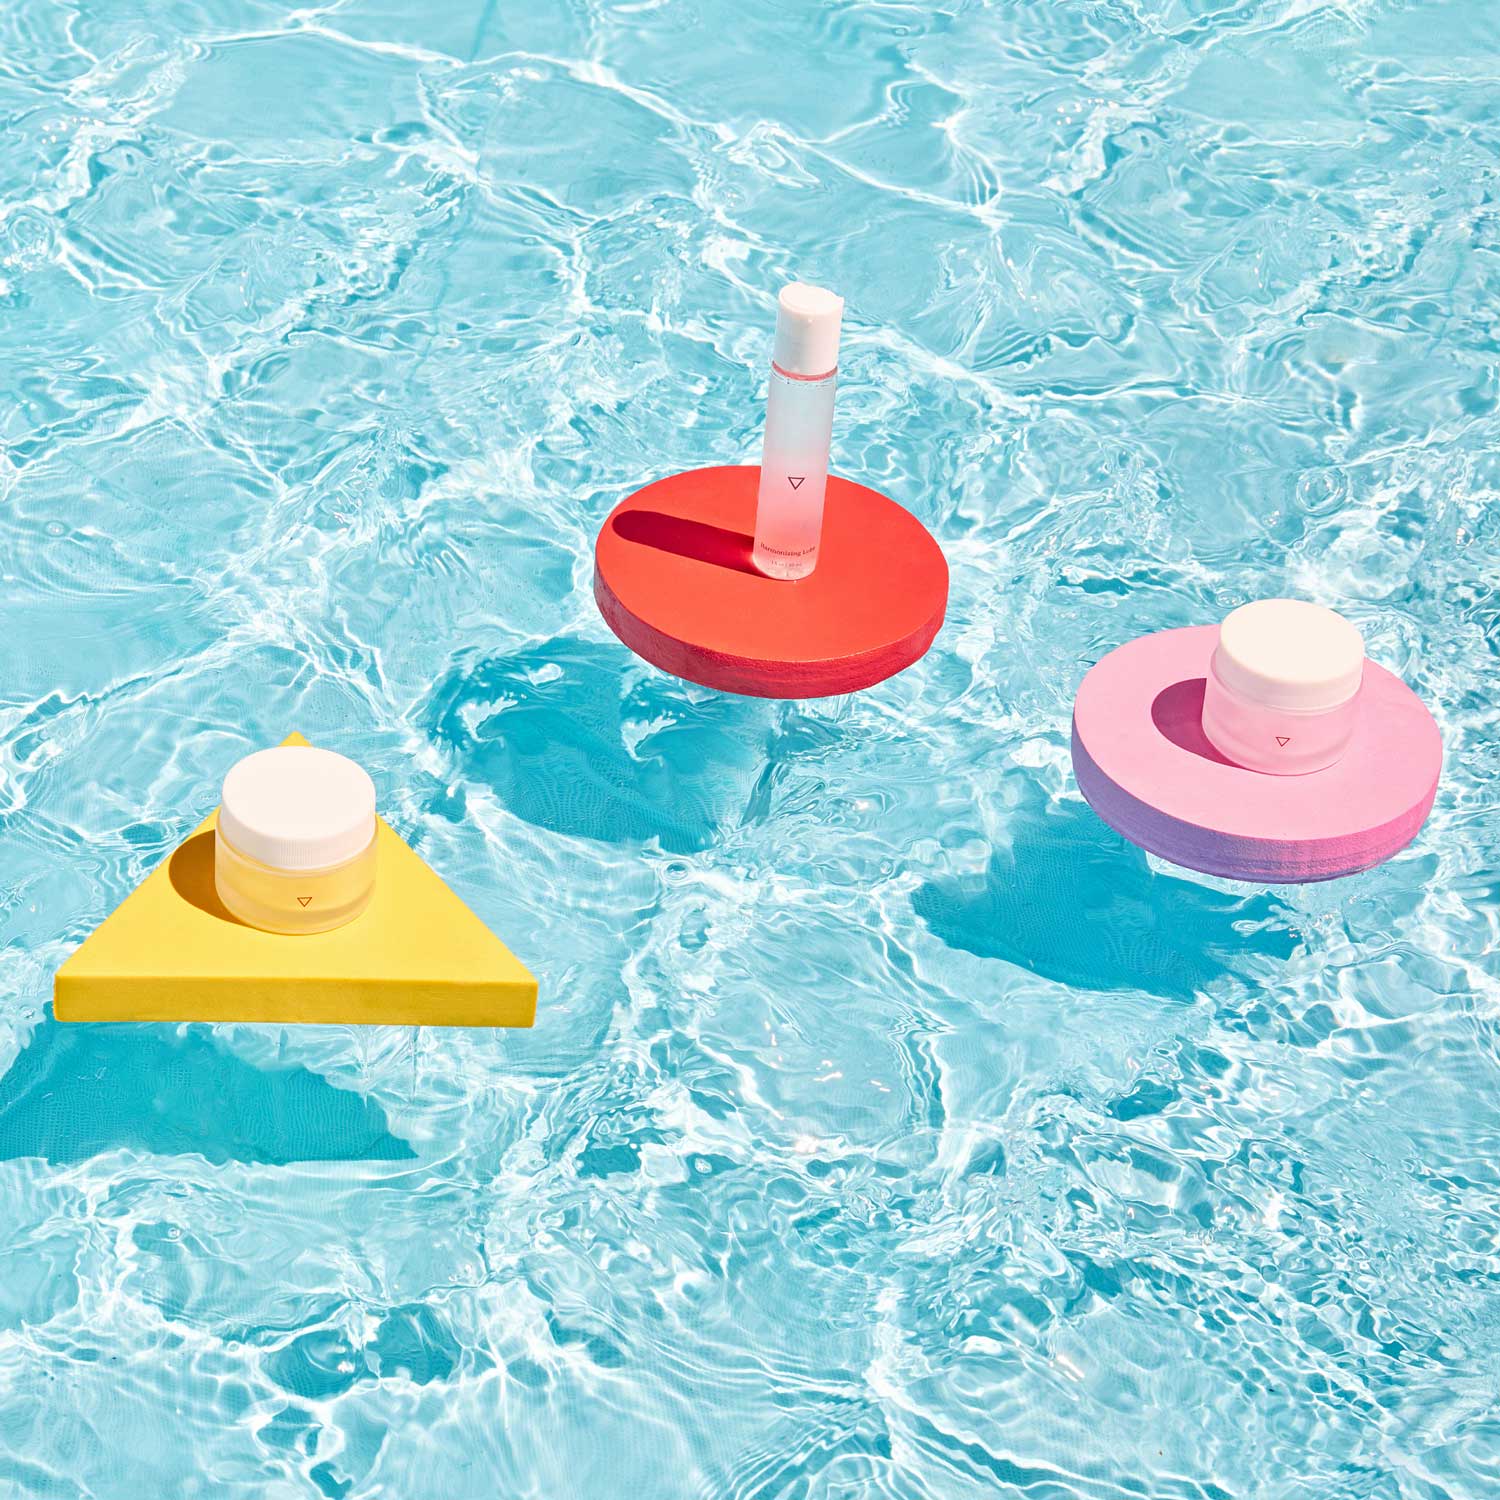 Medication floating in pool on colorful geometric shapes